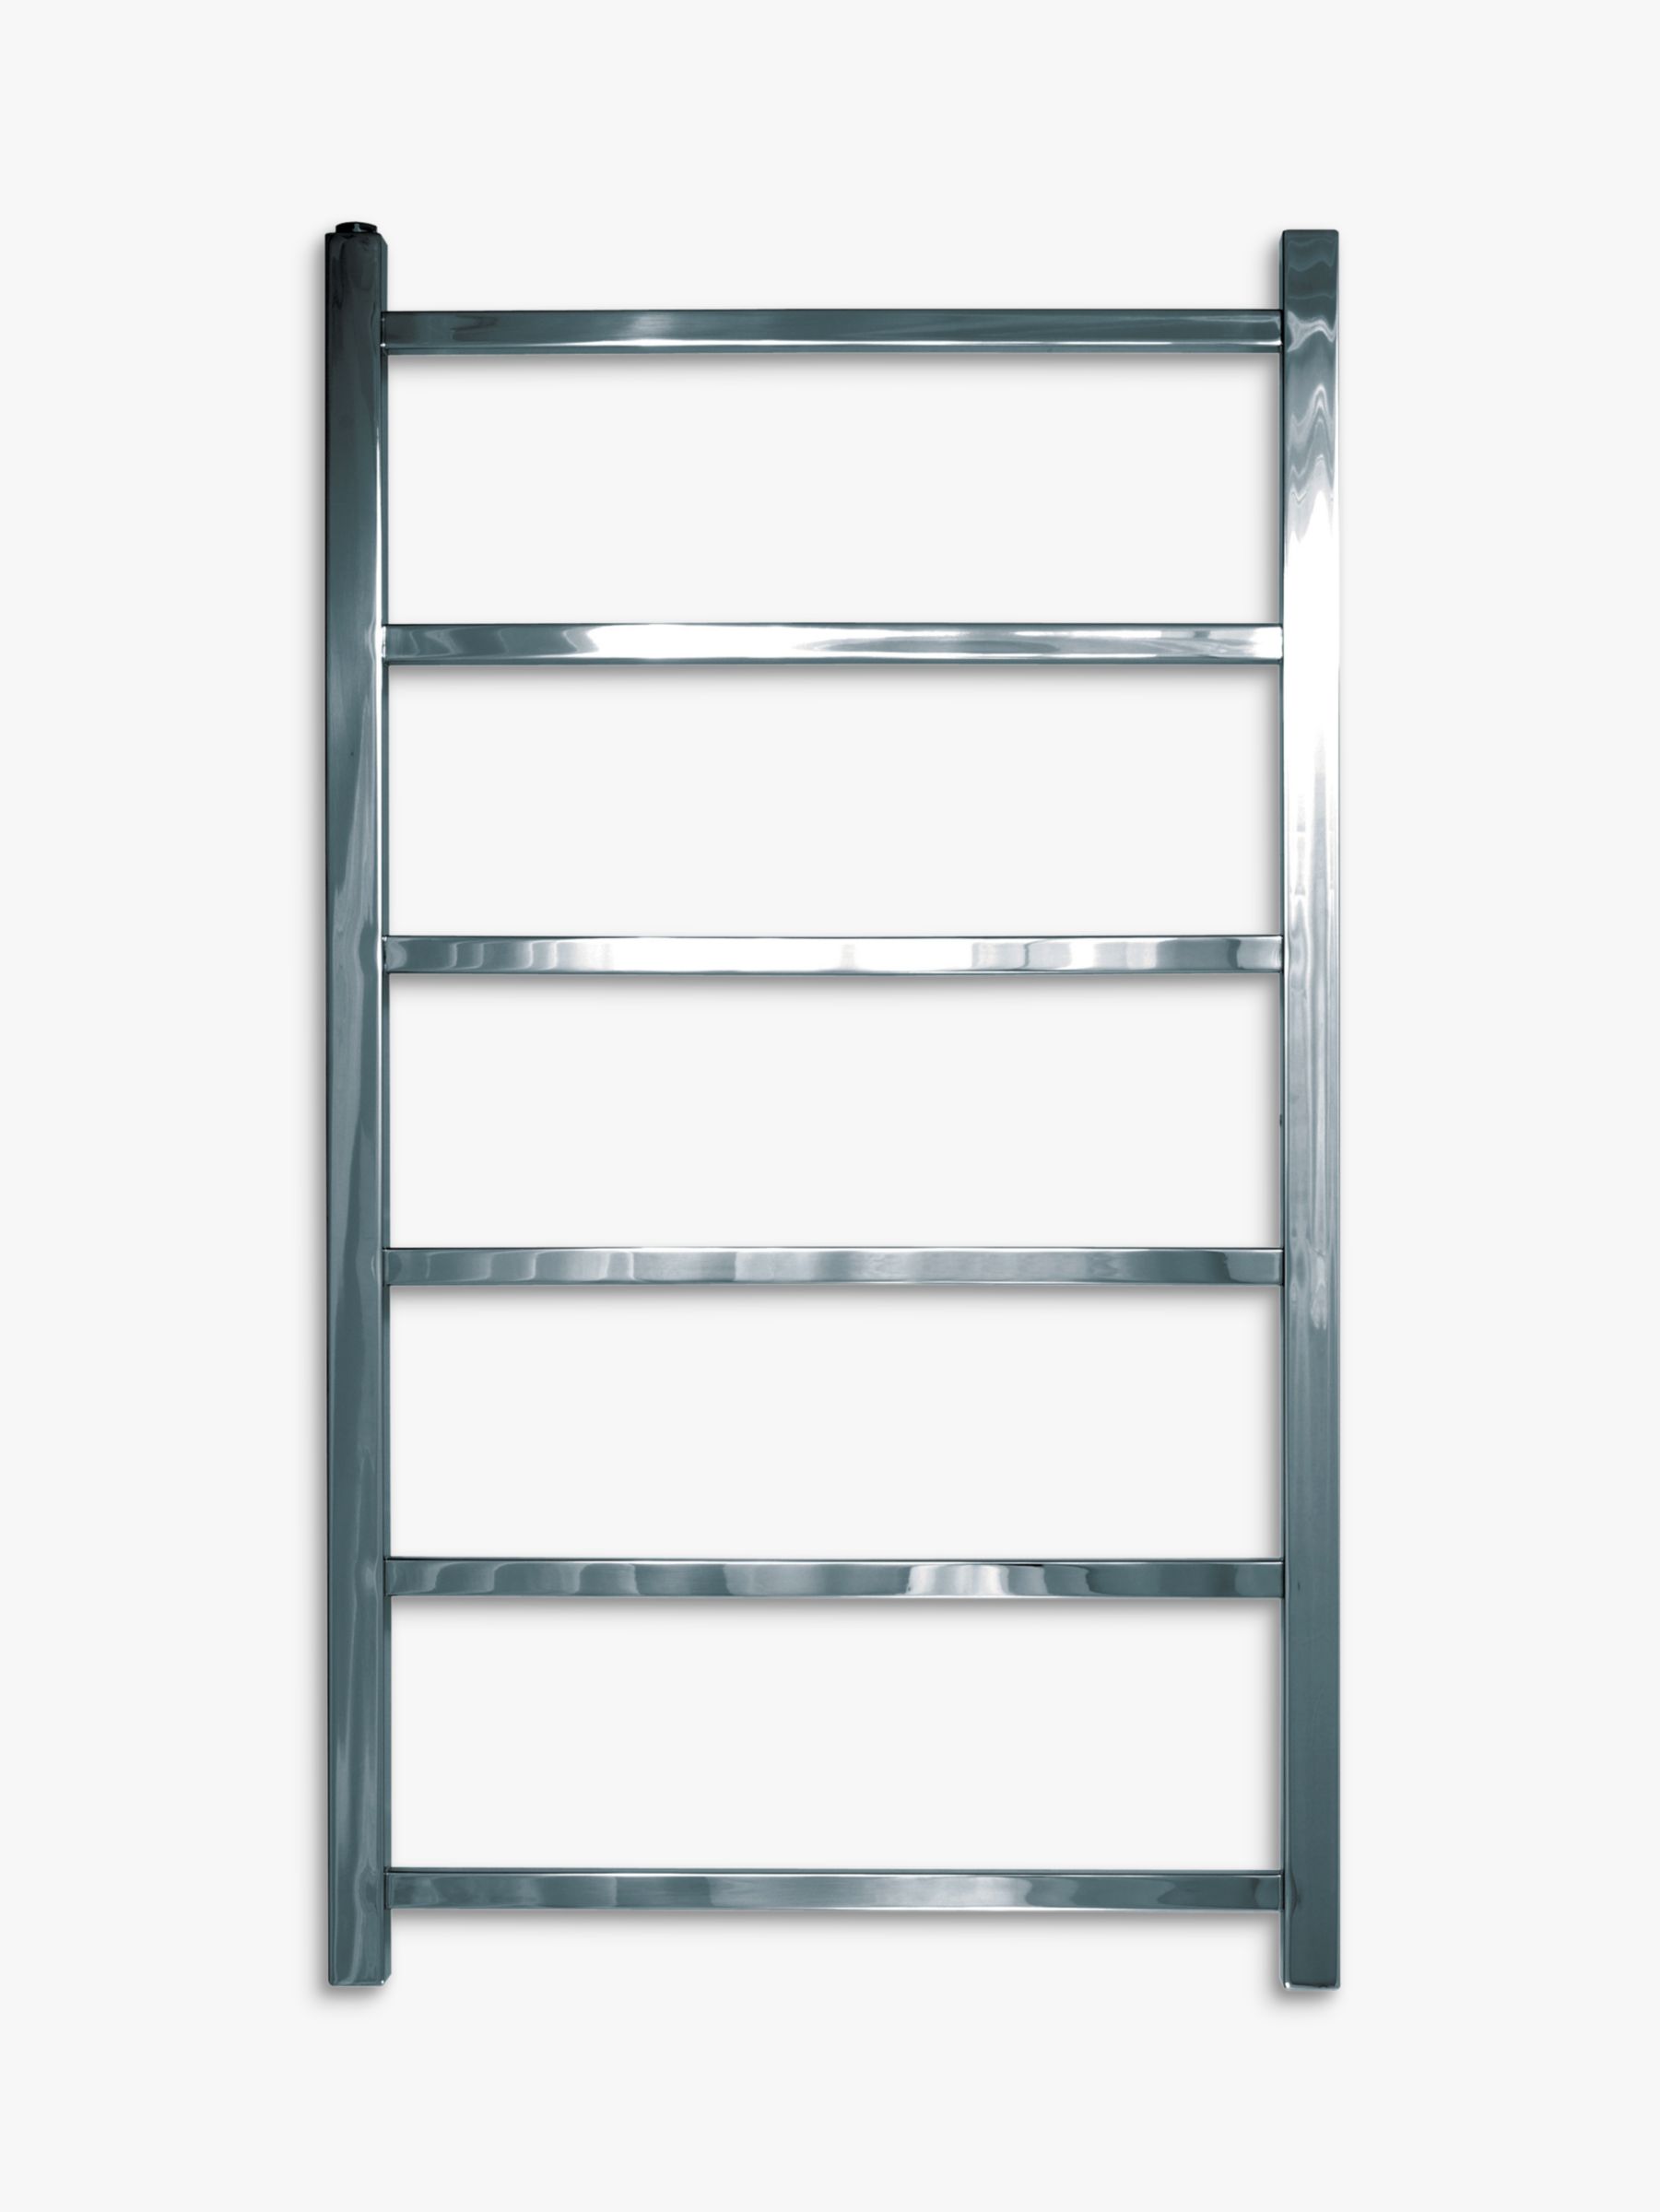 John Lewis & Partners Peel 900 Central Heated Towel Rail and Valves, from the Floor